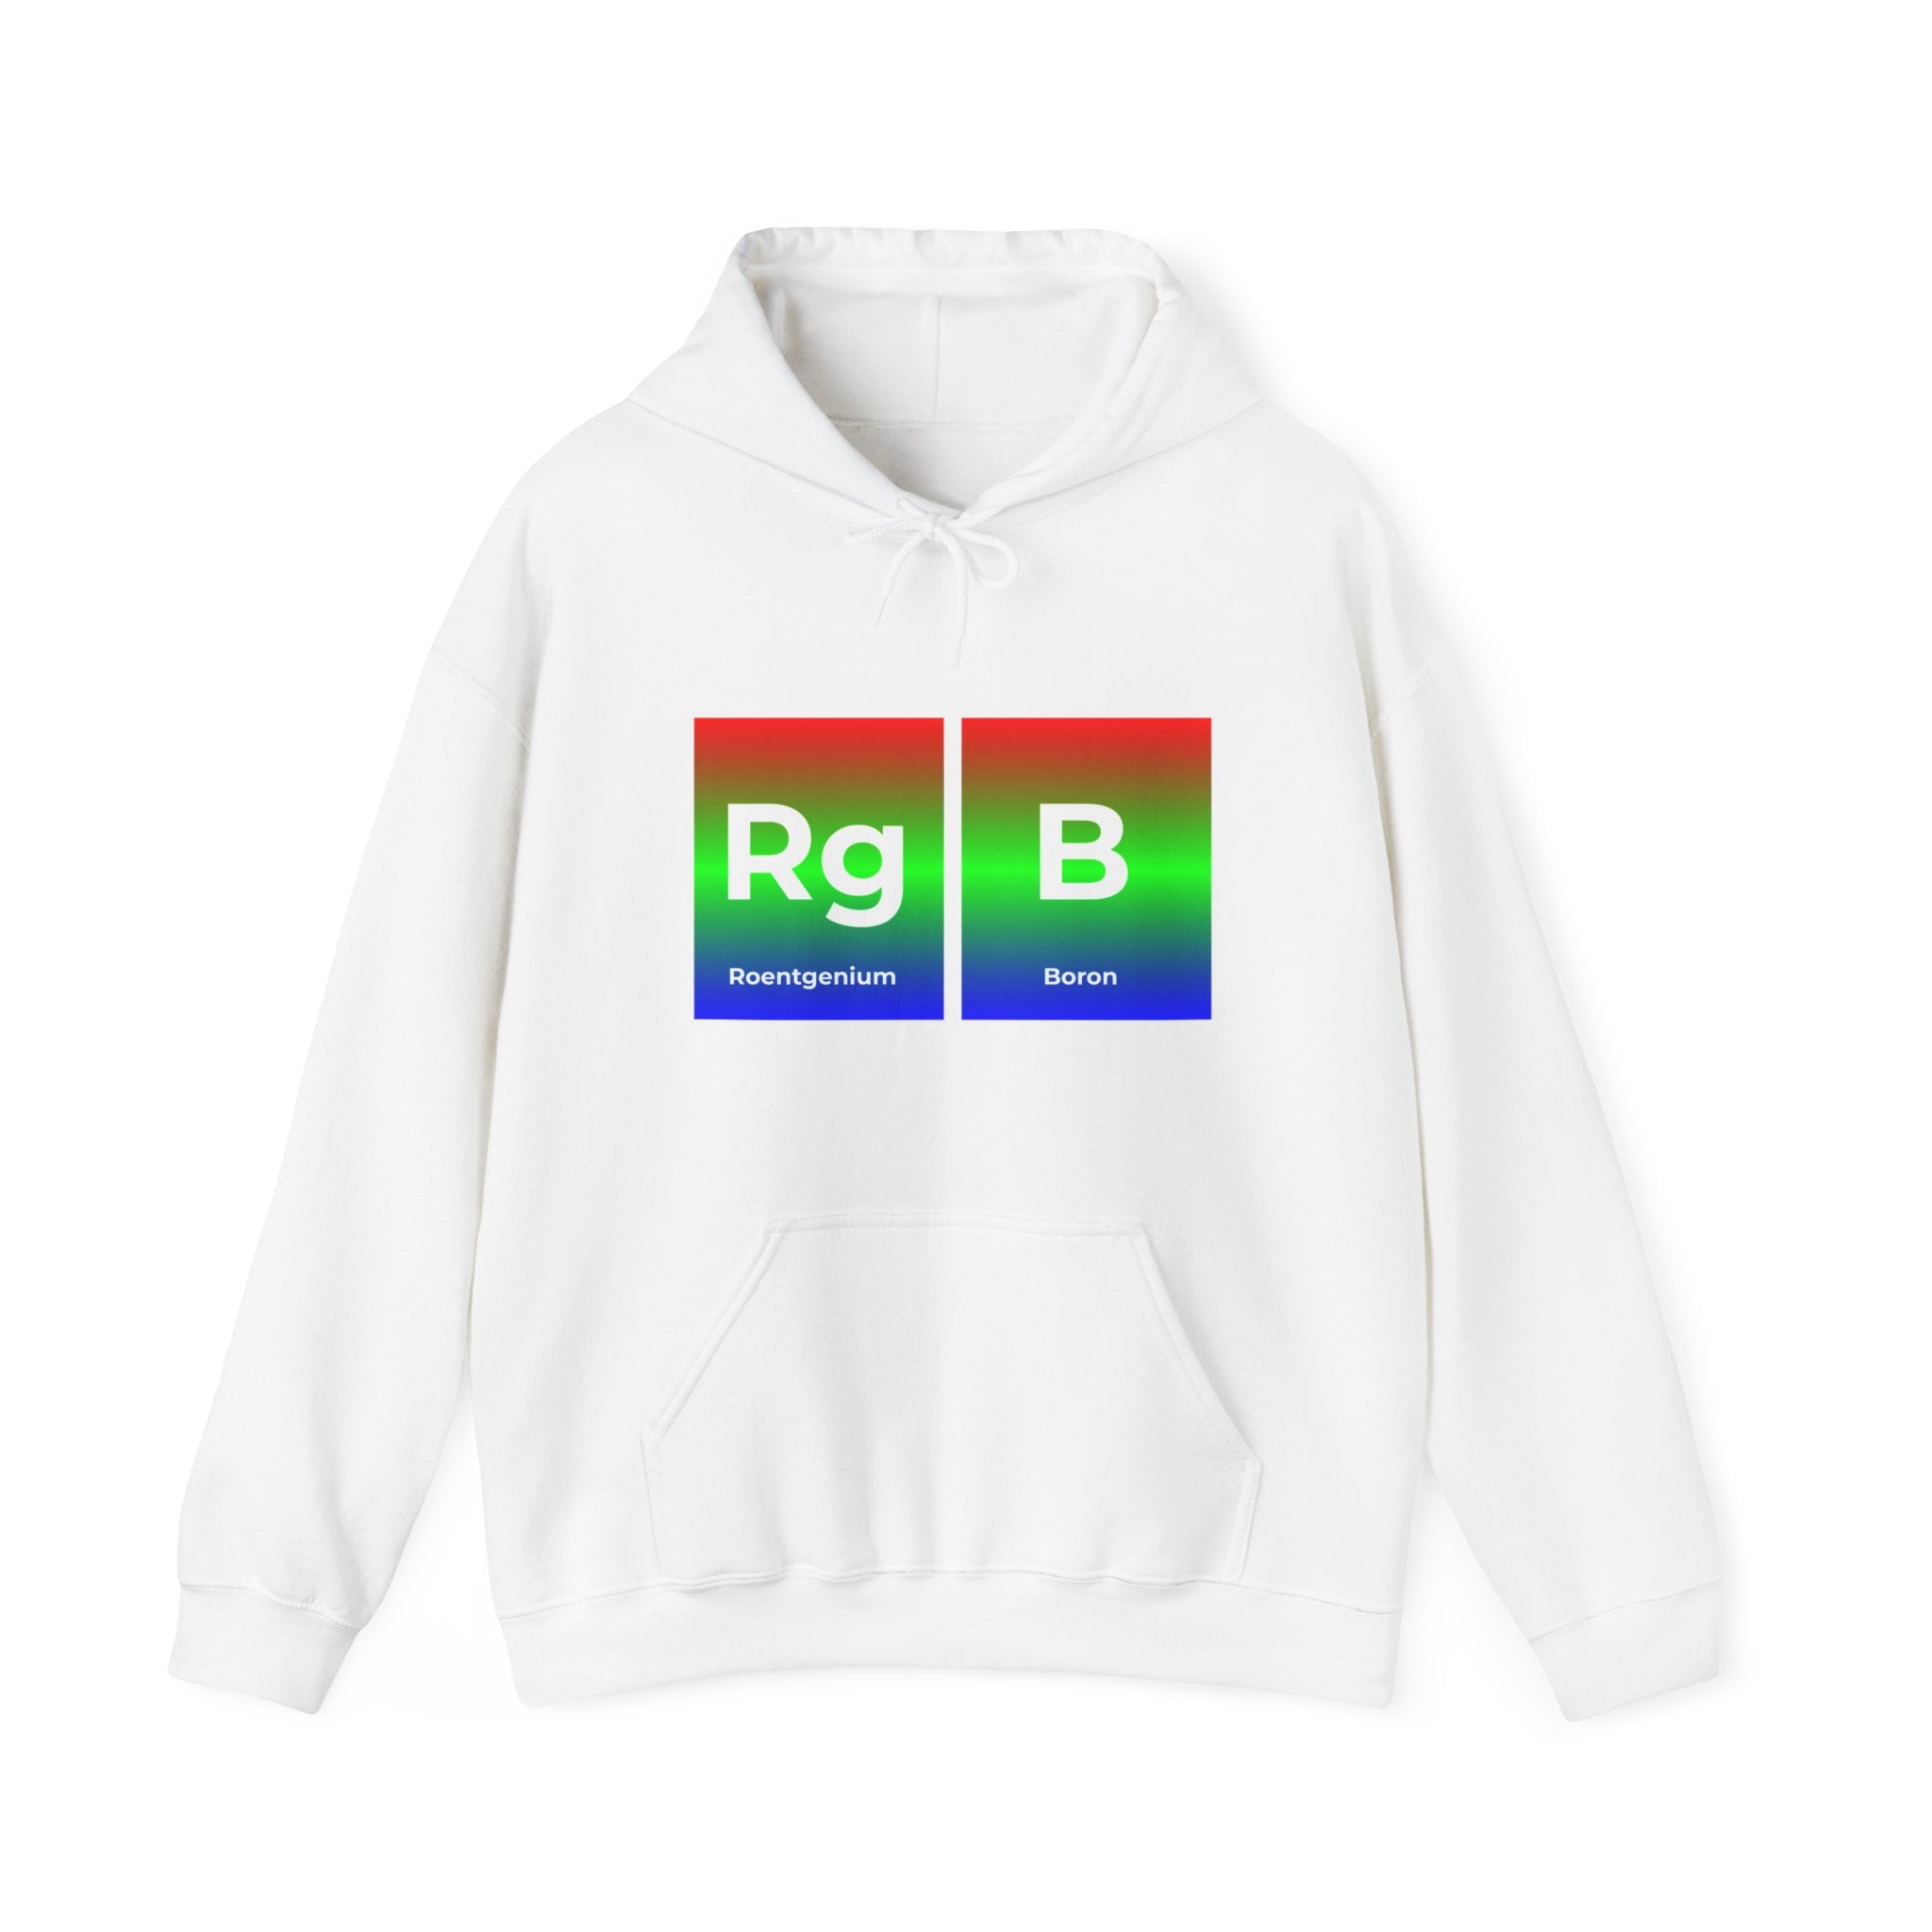 RG-B - Hooded Sweatshirt featuring a graphic with the letters "Rg" and "B" styled like periodic table elements, labeled "Roentgenium" and "Boron," on a comfortable gradient red-green-blue background. Part of our exclusive RG-B designs collection.